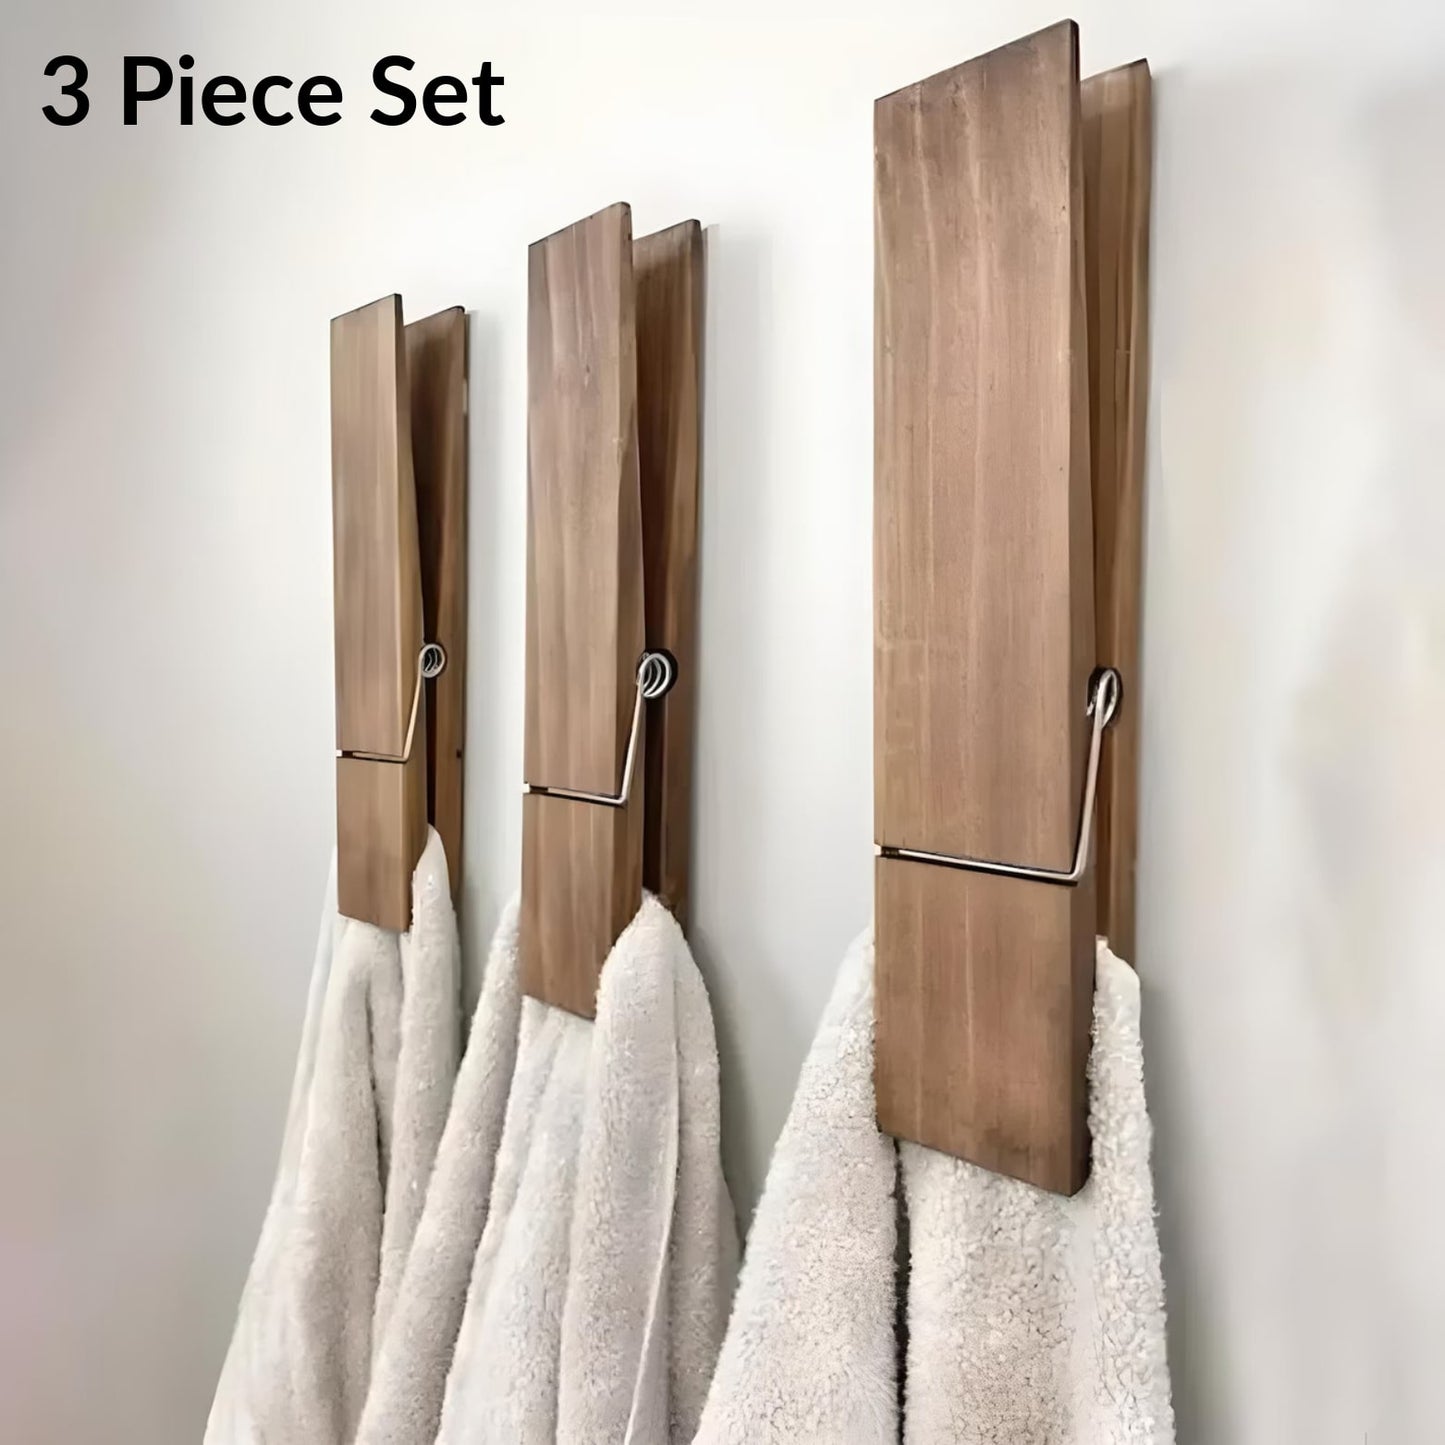 GIANT CLOTHESPIN - TOWEL HOLDERS